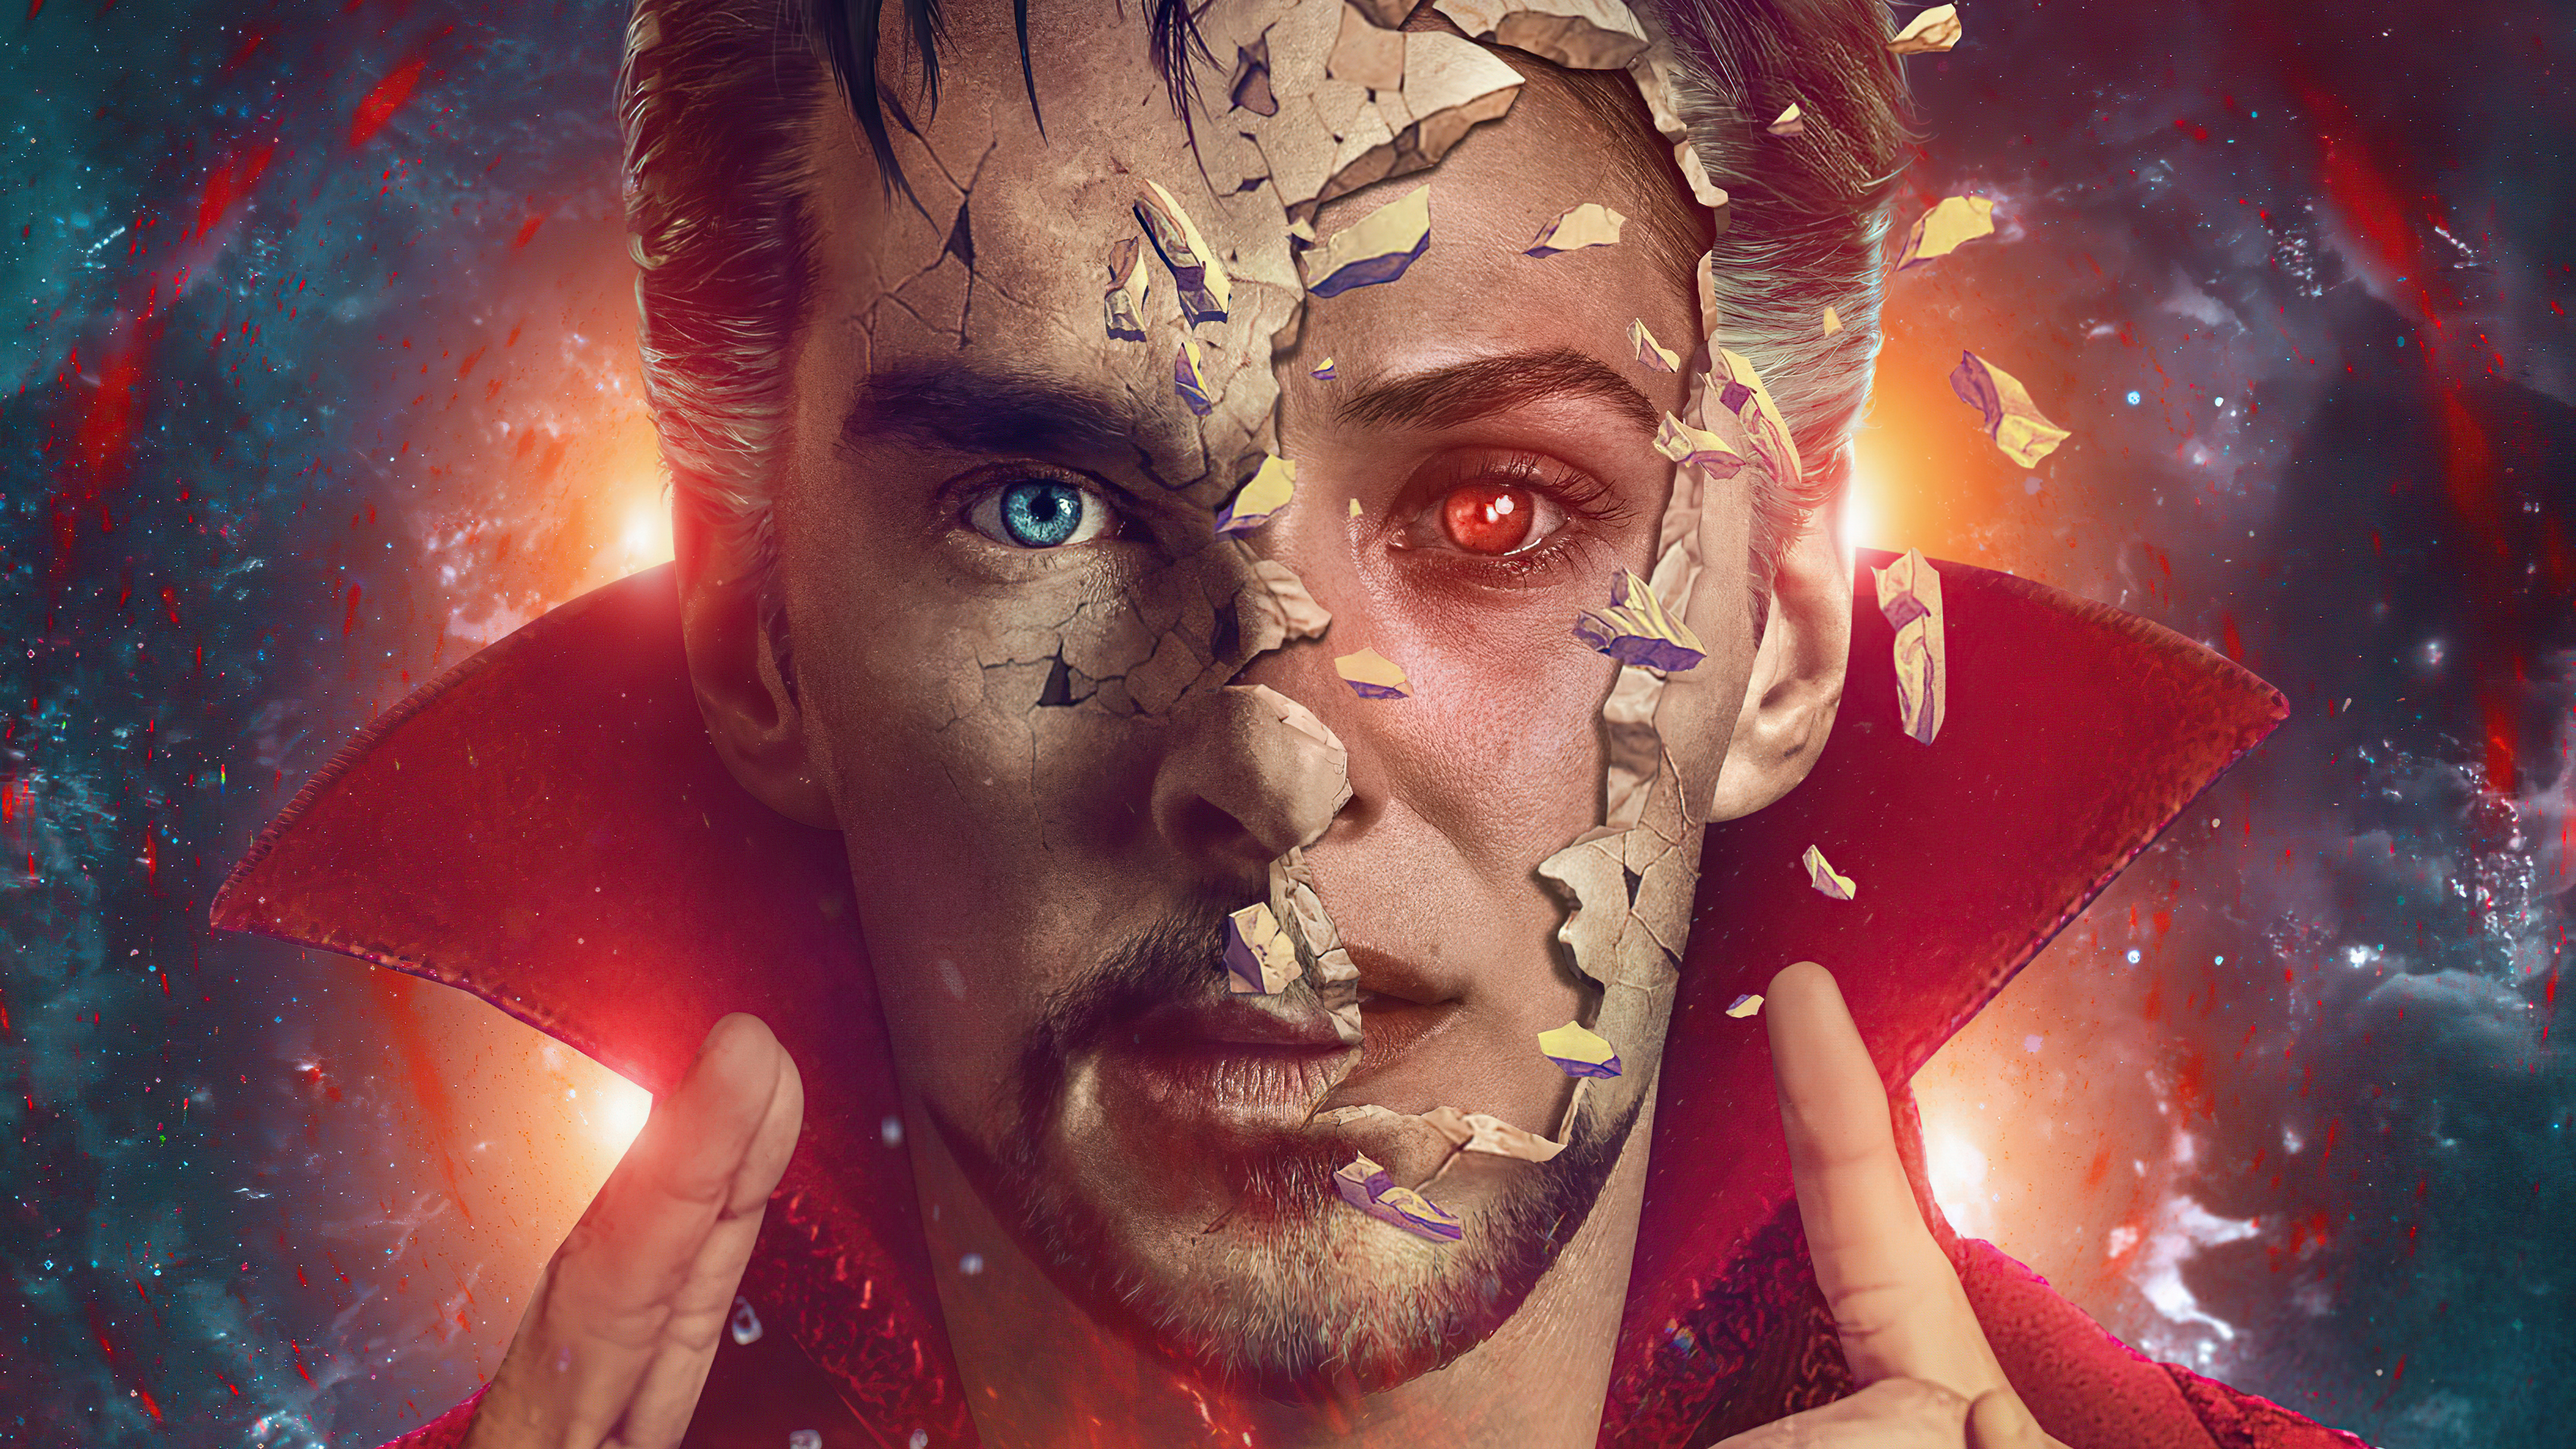 Wallpaper Doctor Strange in the multiverse of madness Wandavision